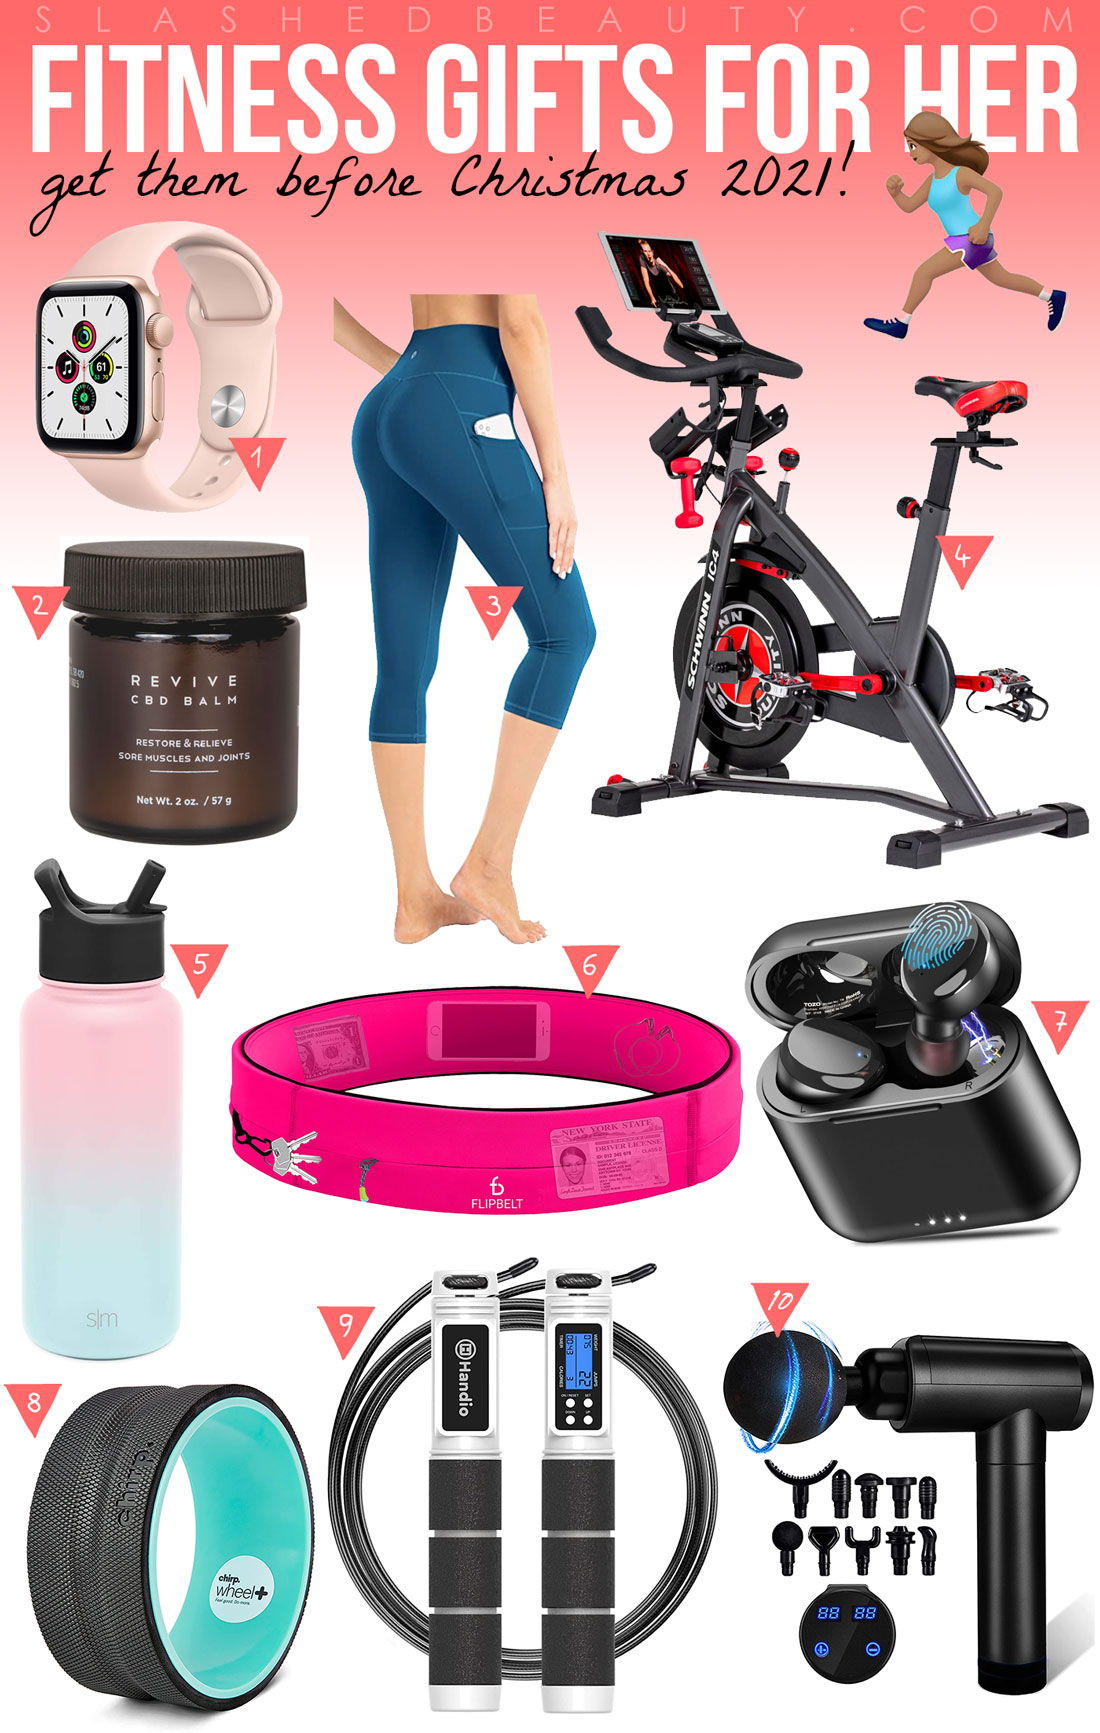 2021 Fitness Gift Guide: 10 Workout Gifts for Her | Gym Gifts 2020 | Gifts for Crossfitters | Slashed Beauty